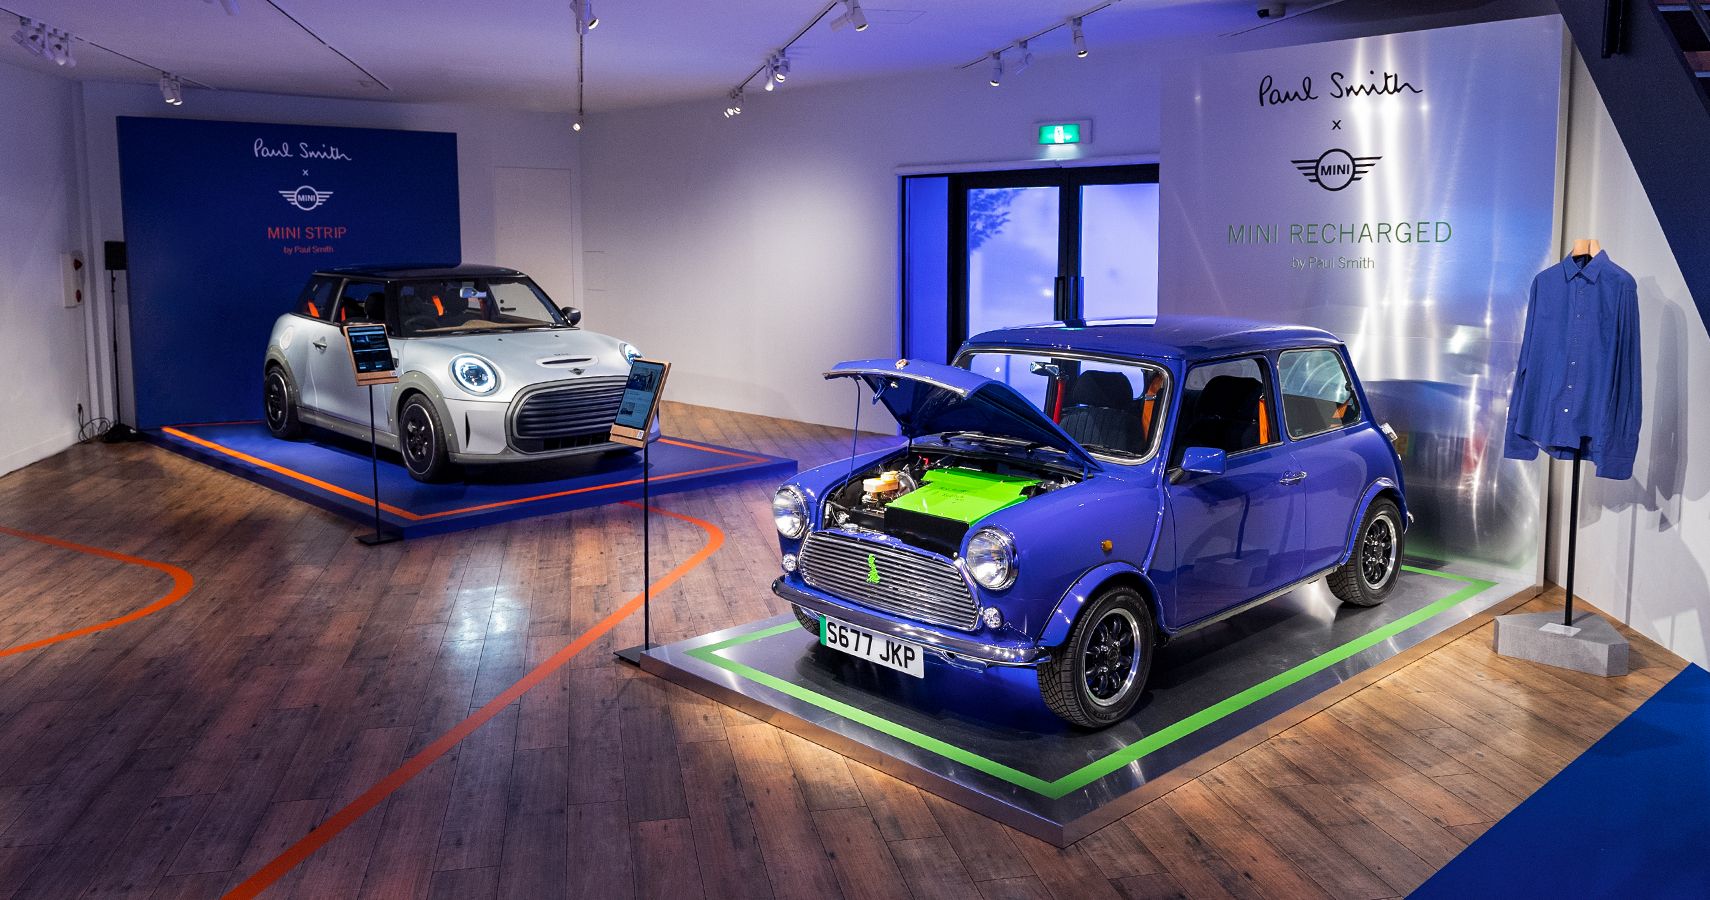 Gallery interior, MINI Strip and MINI Recharged